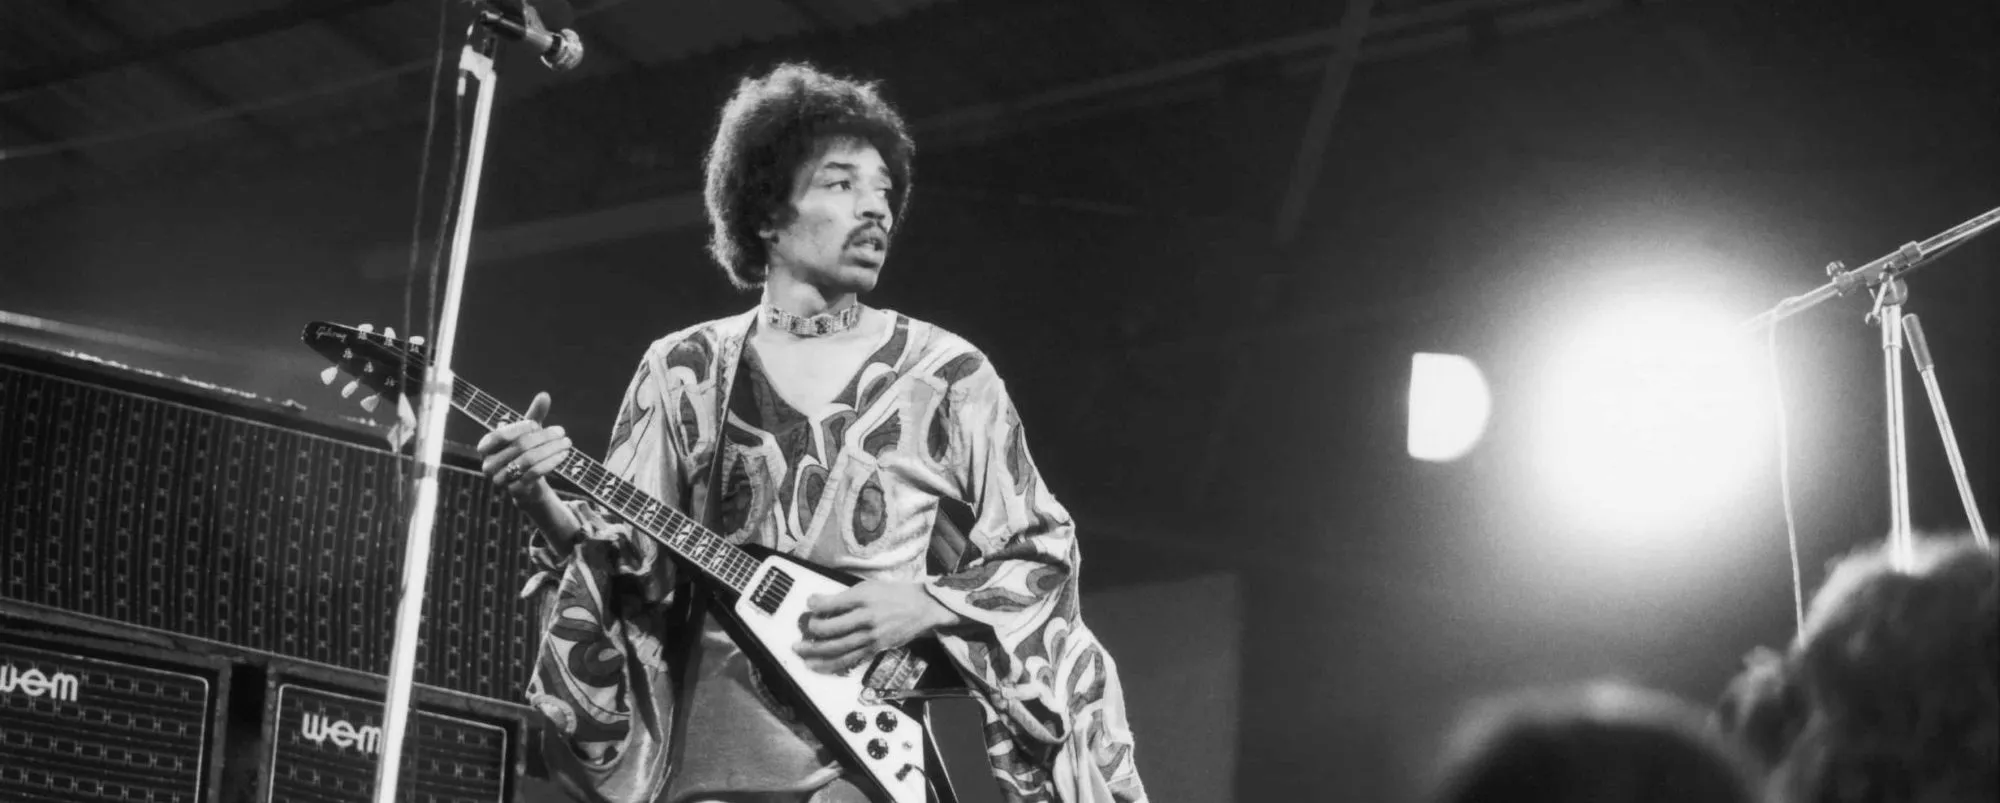 Meaning Behind Jimi Hendrix’s “Voodoo Chile”